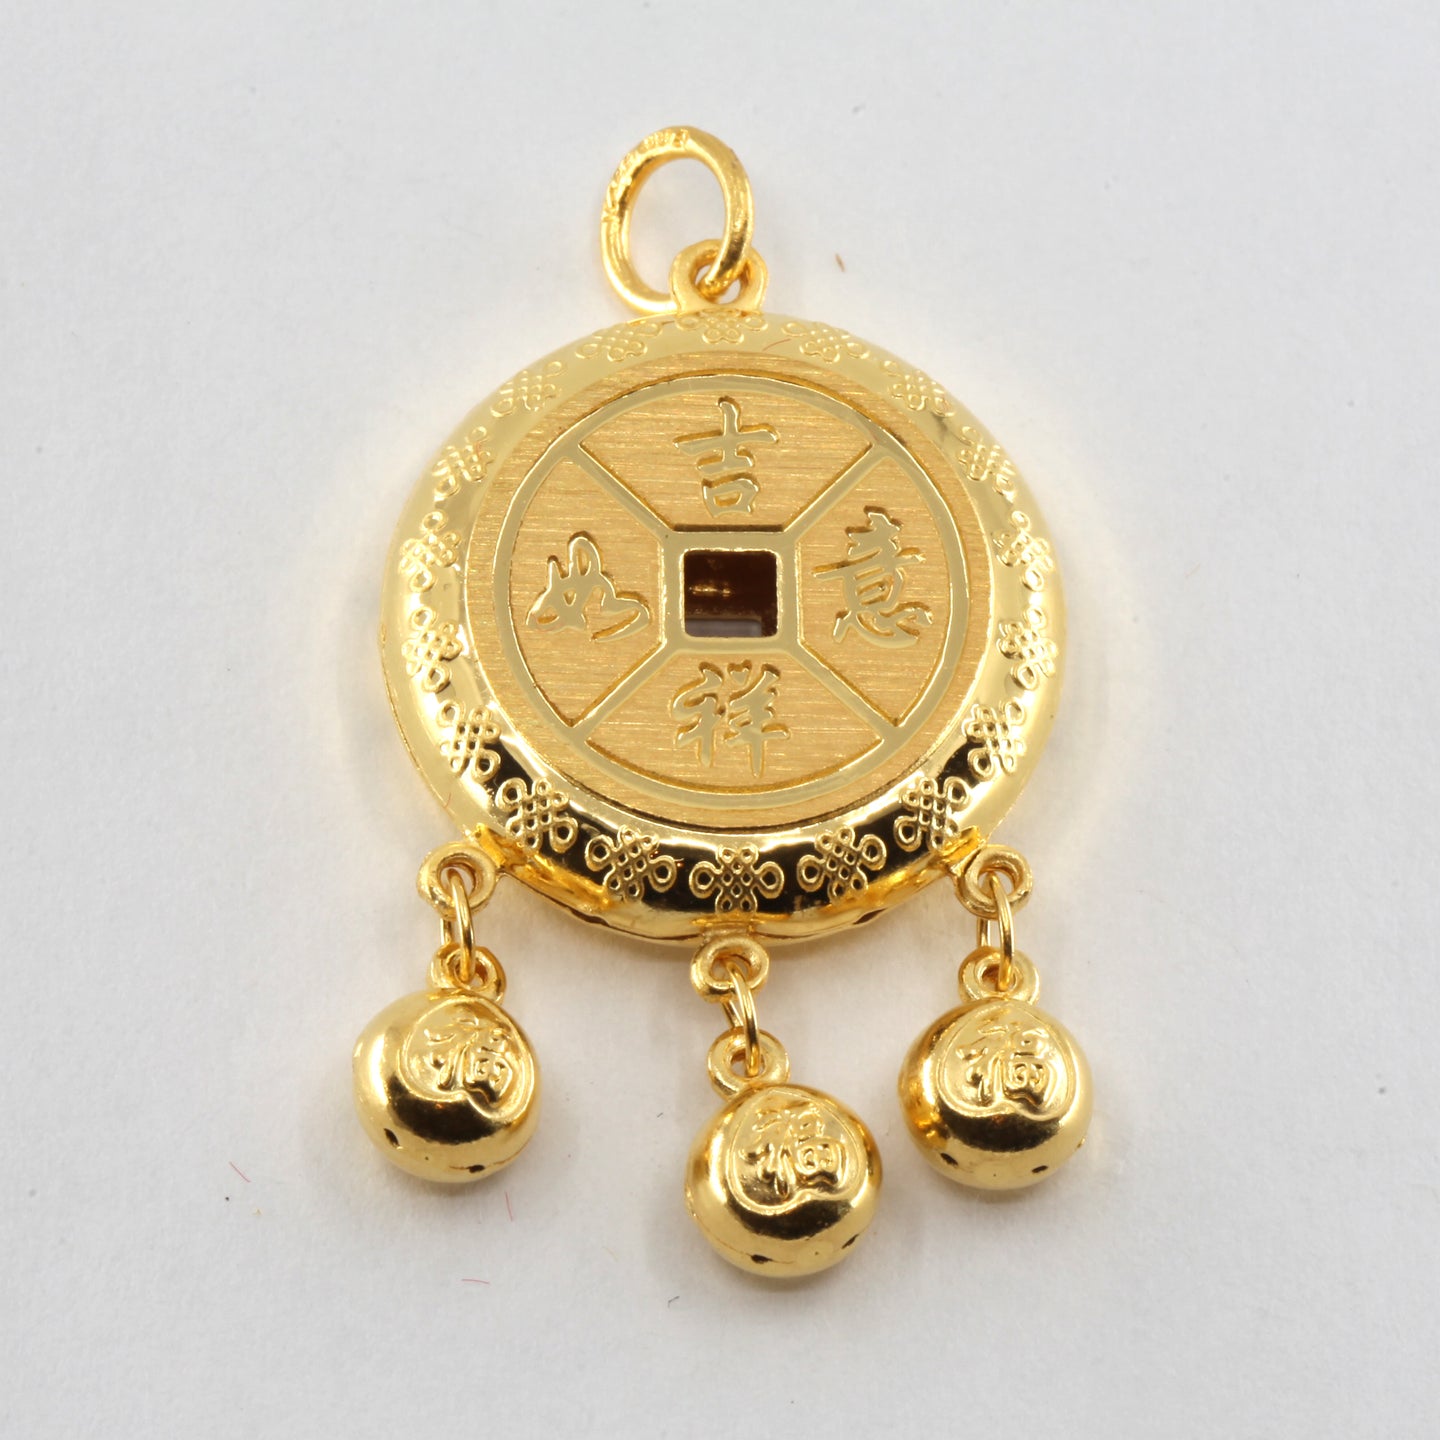 24K Solid Yellow Gold Baby Puffy Longevity Lock with Bells Hollow Pendant 9.5 Grams